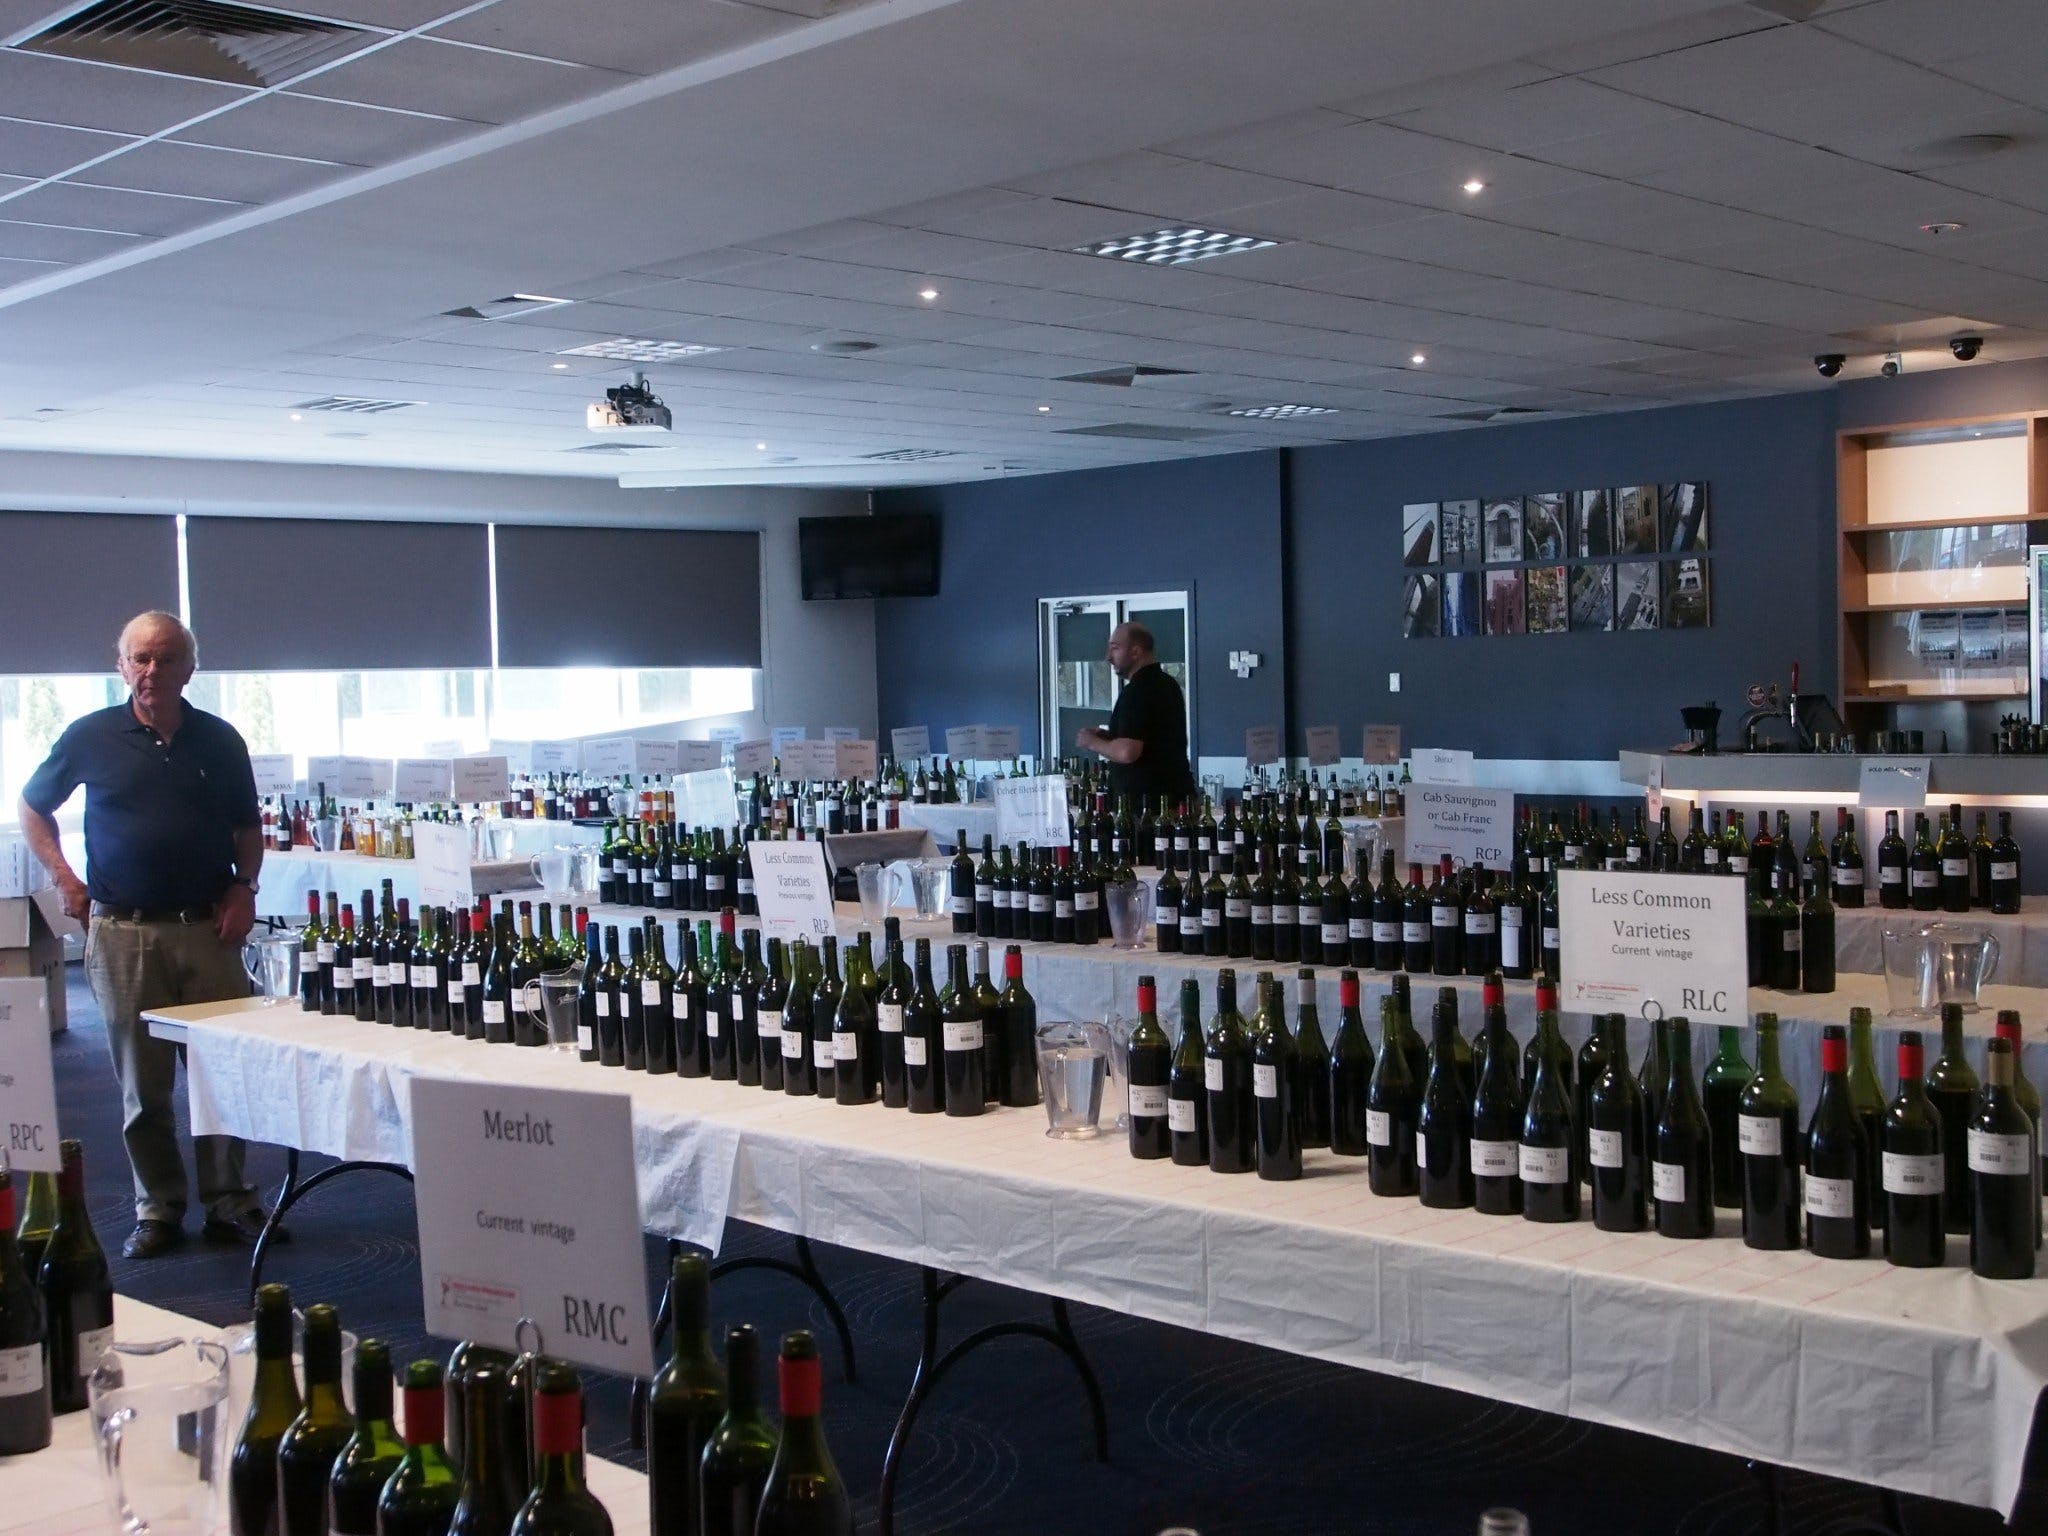 Eltham and District Wine Guild Annual Wine Show - 51st Annual Show - Accommodation Gold Coast